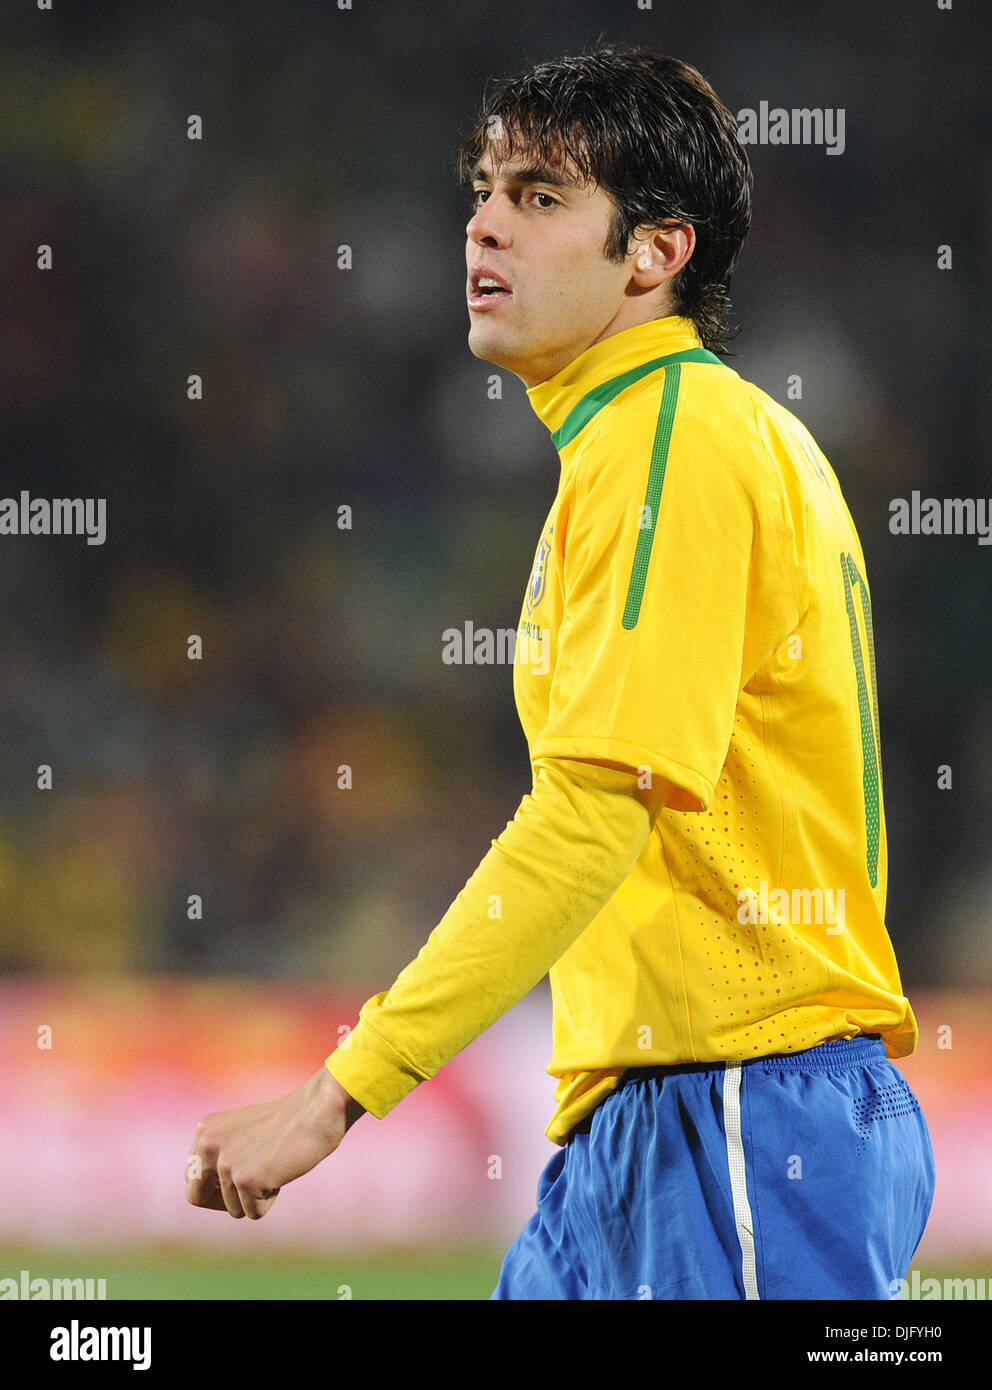 June 28, 2010 - Johannesburg, South Africa - Kaka of Brazil looks on the left during the 2010 FIFA World Cup soccer match between Brazil and Chile at Ellis Park Stadium on June 28, 2010 in Johannesburg, South Africa. (Credit Image: © Luca Ghidoni/ZUMApress.com) Stock Photo